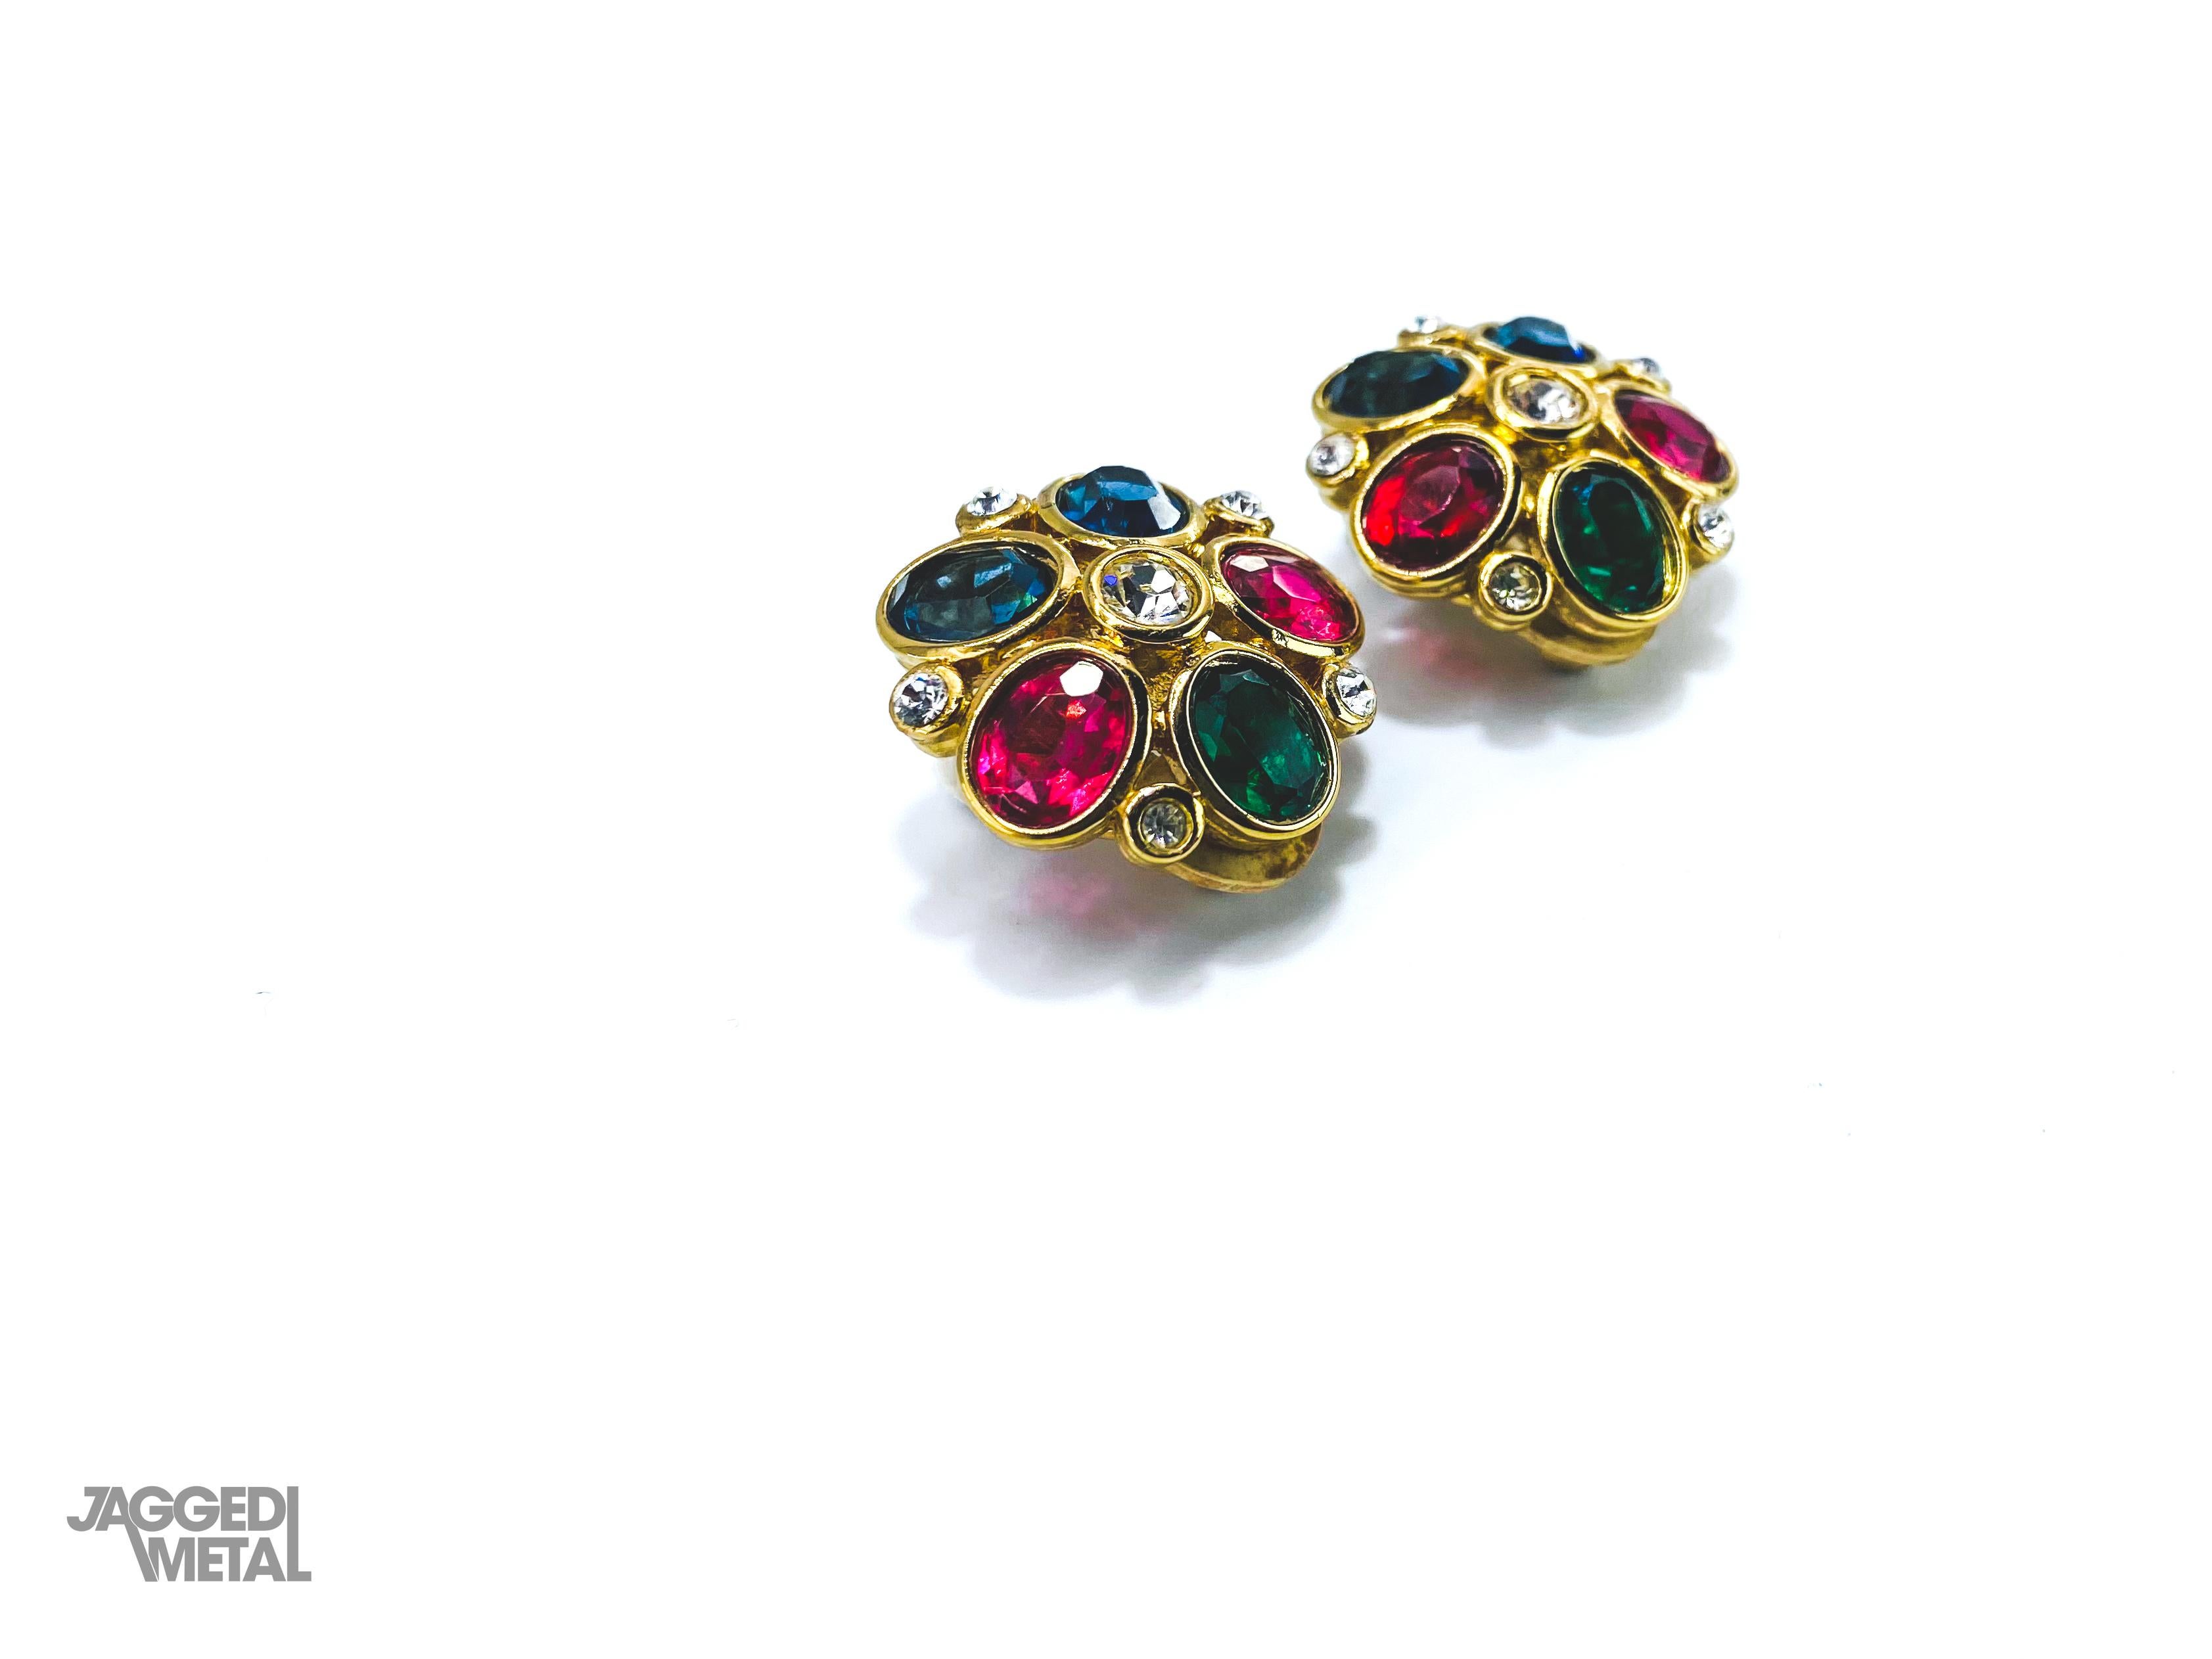 Nina Ricci 1980s Vintage Clip On Earrings 

Detail
-Made in France in the 1980s
-Set with pink, blue and green cabochons and tiny crystals  
-Crafted from gold plated metal

Size & Fit
-Approx 0.75 inches across
-Strong, comfortable